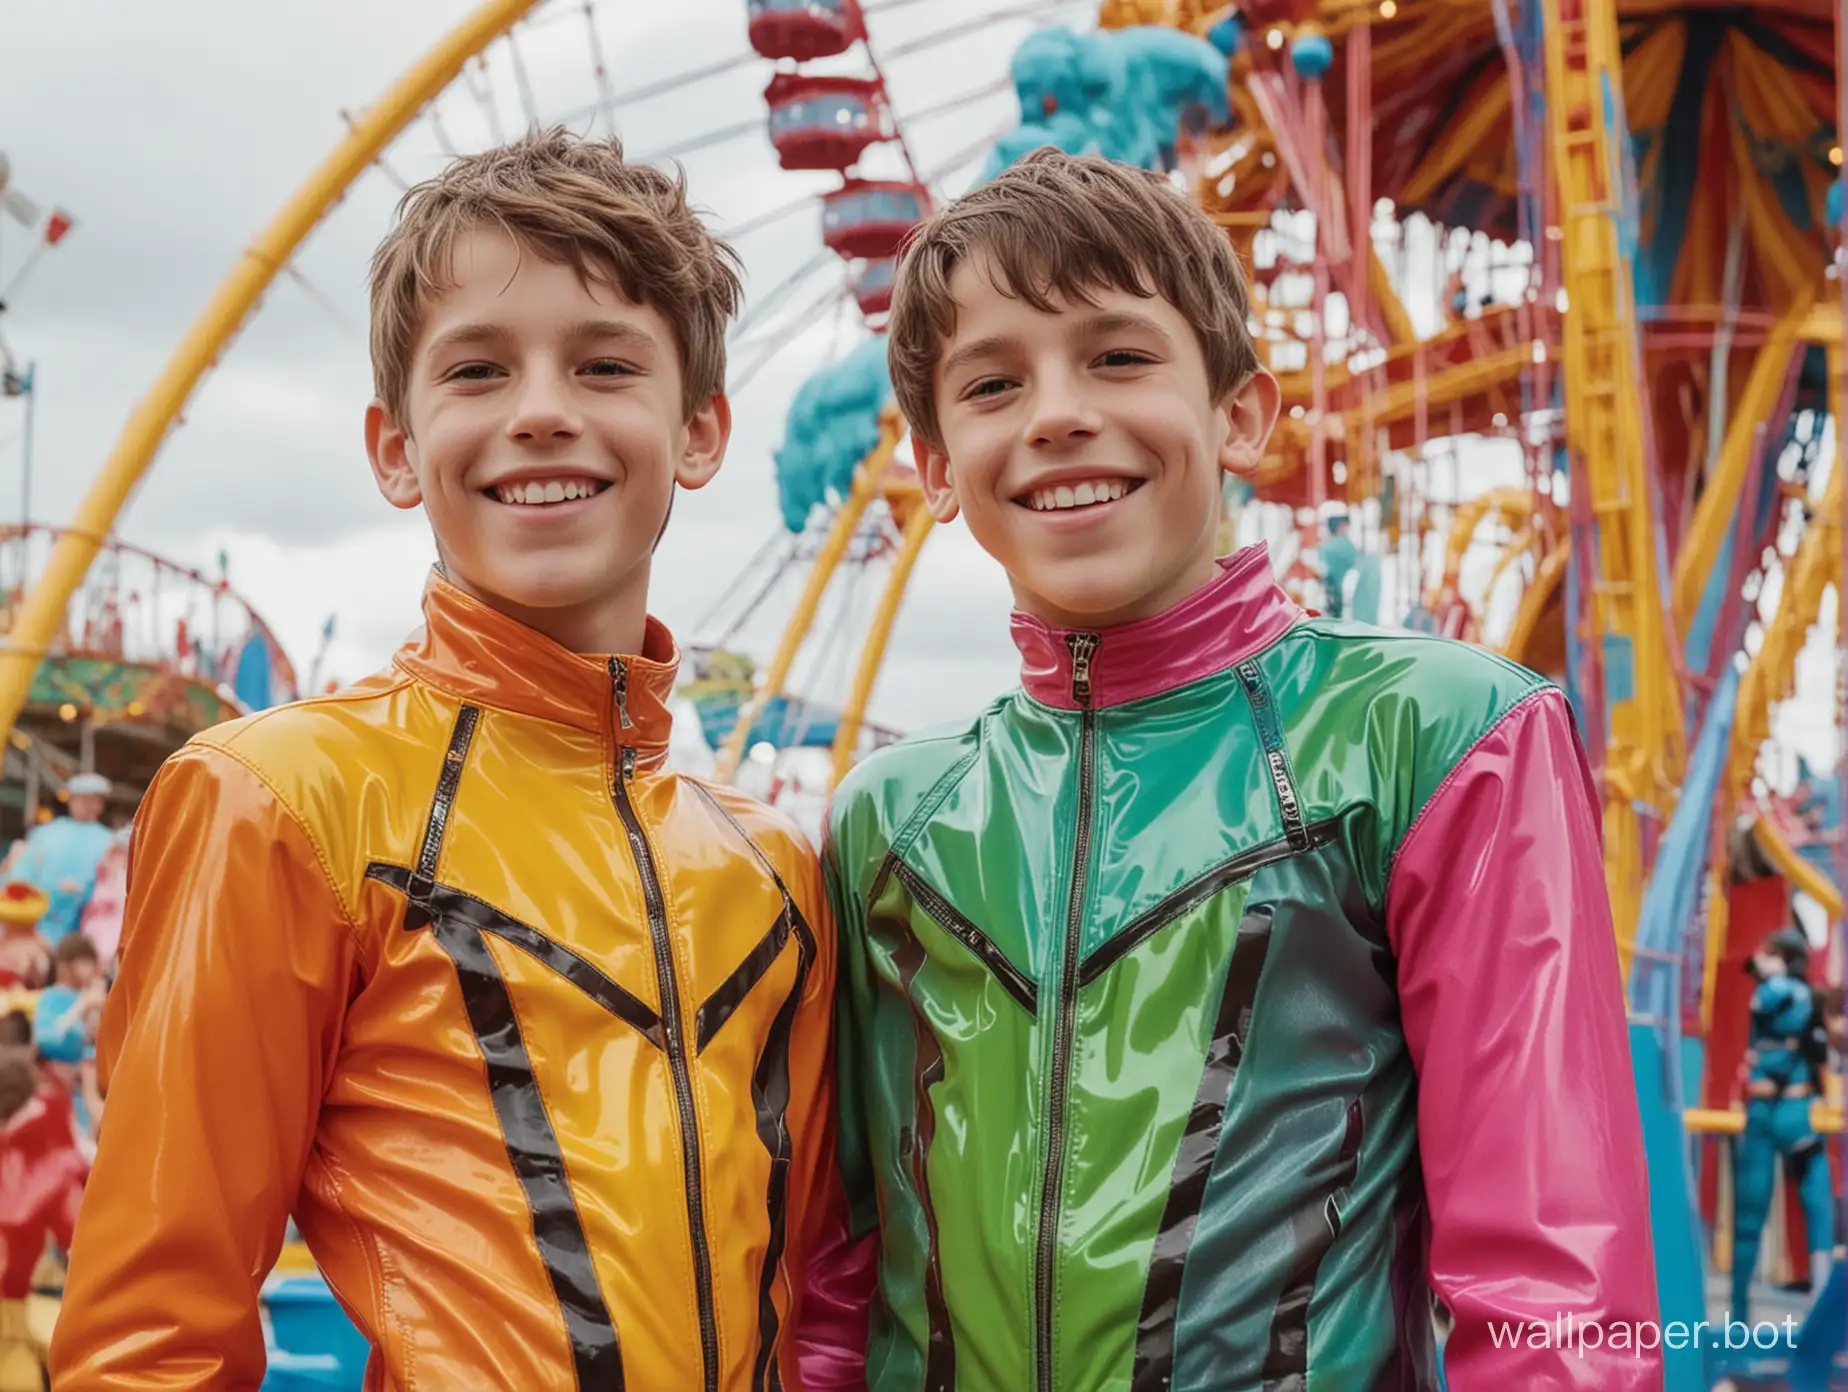 Amusement-Park-Twins-in-Vibrant-Latex-Outfits-Sharing-a-Joyful-Embrace